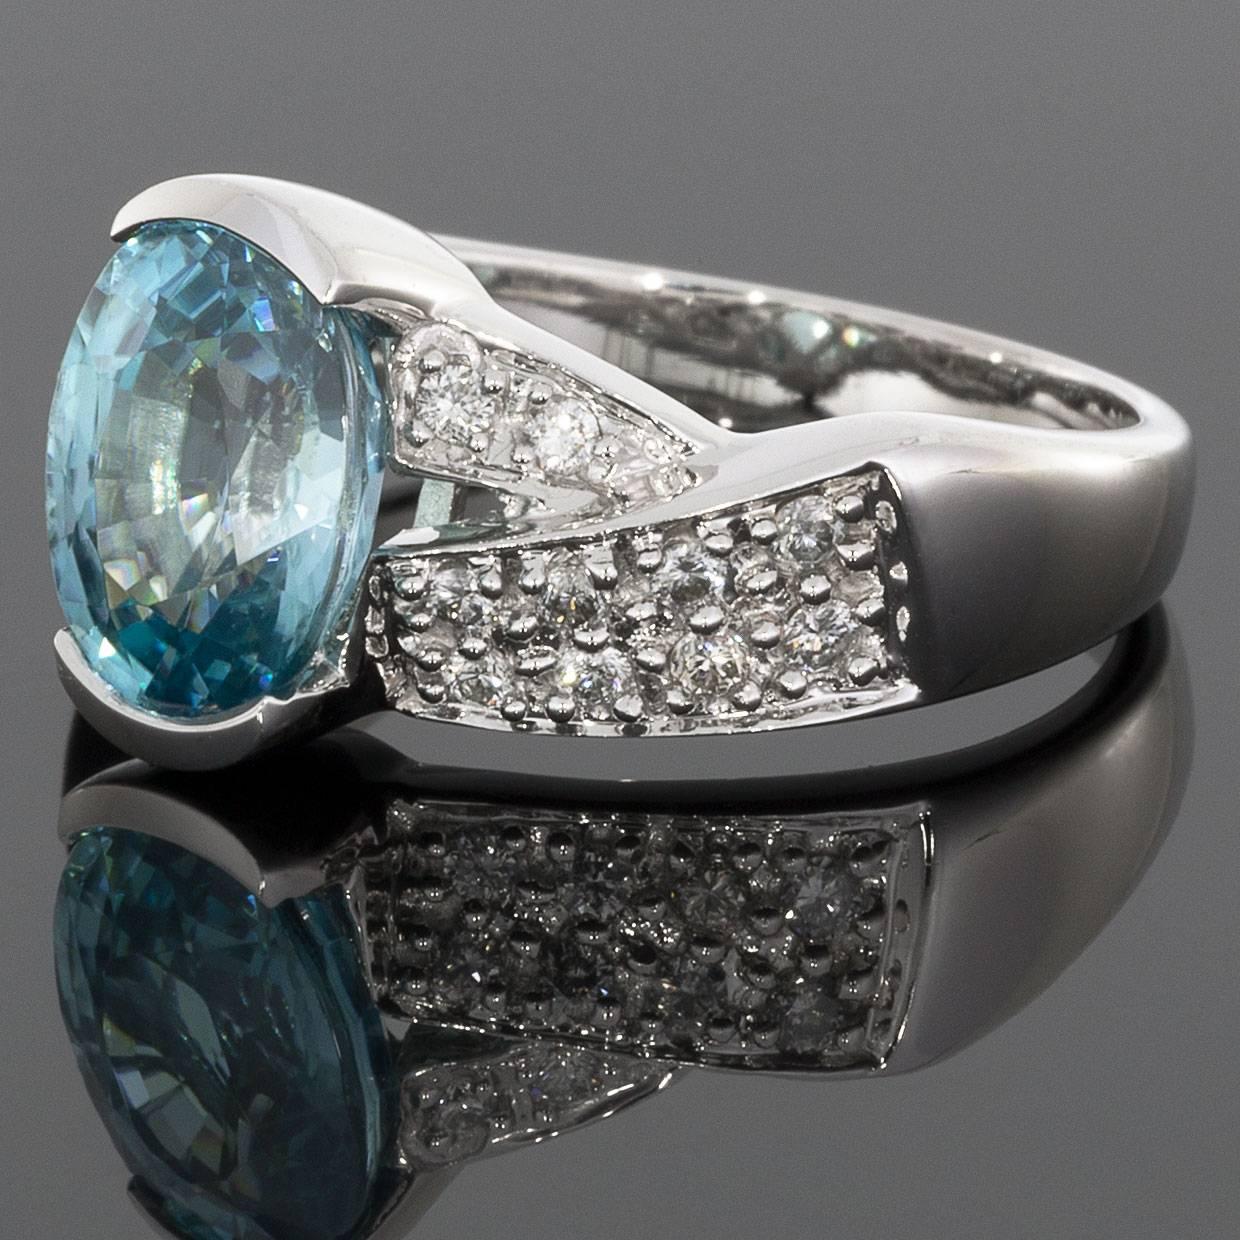 This stunning blue zircon & diamond ring is perfect for dressing up any outfit! Its tranquil blue zircon, sparkling diamonds, & icy white gold will go with everything. It features a 4.0 carat, oval brilliant cut, blue zircon that is securely